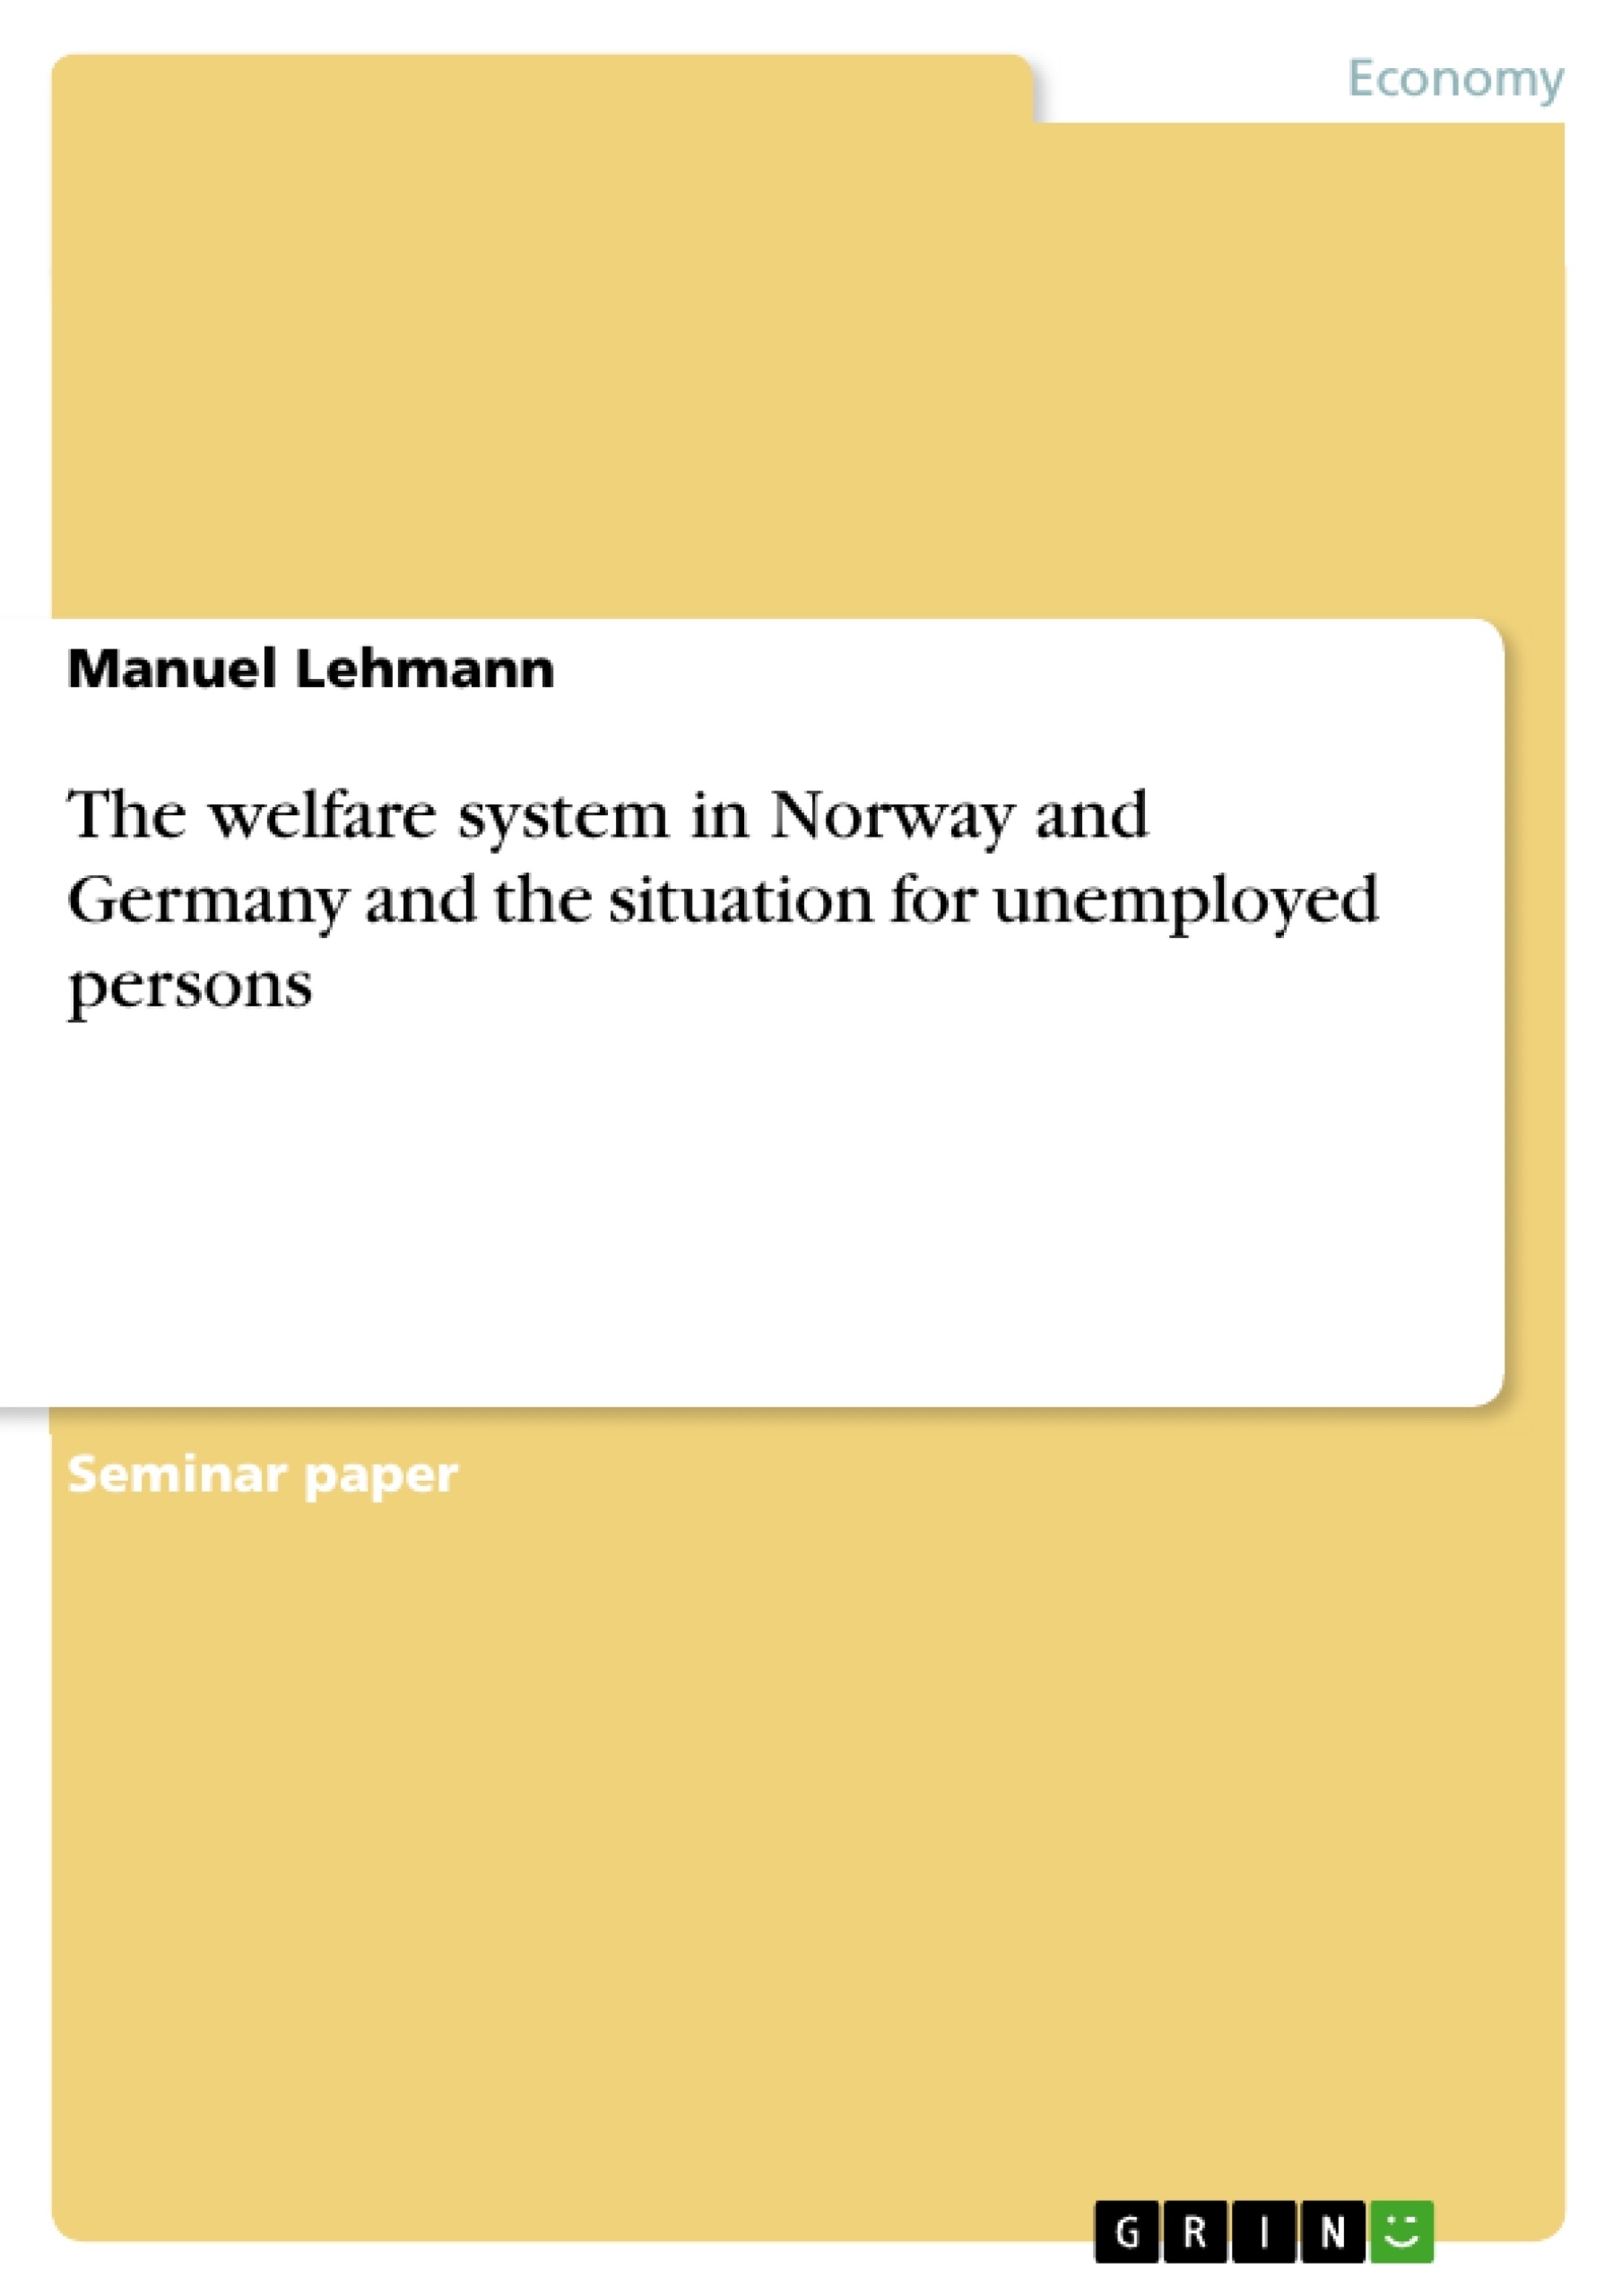 Título: The welfare system in Norway and Germany and the situation for unemployed persons